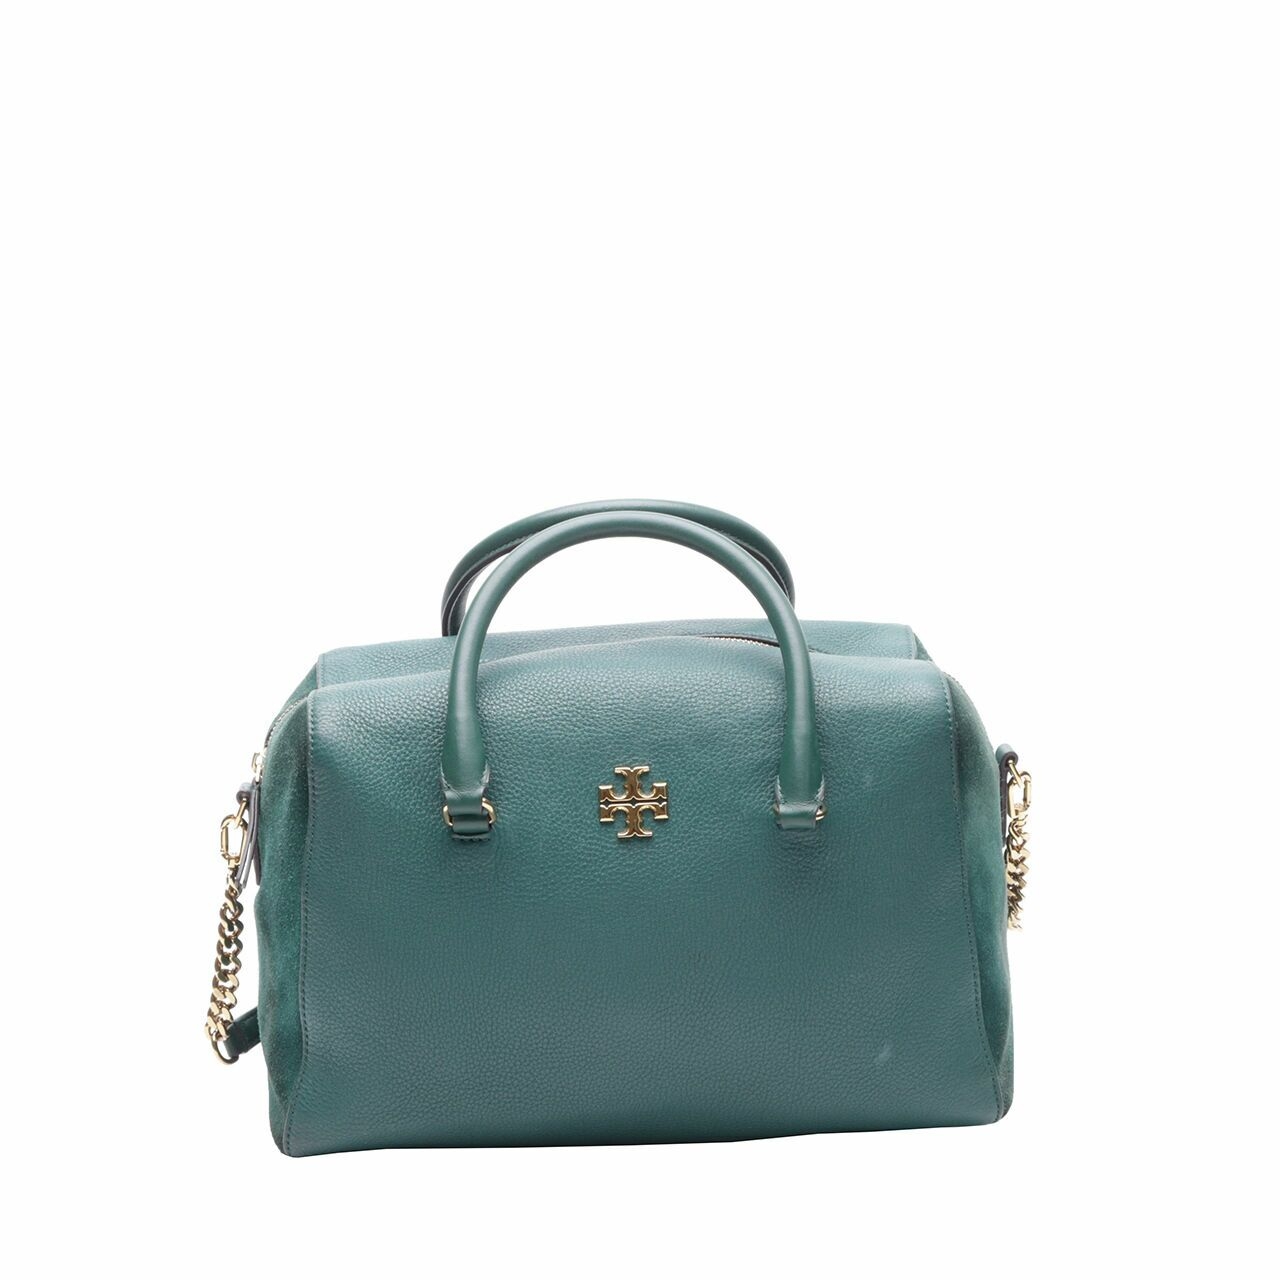 Tory Burch Green Suede Leather Satchel